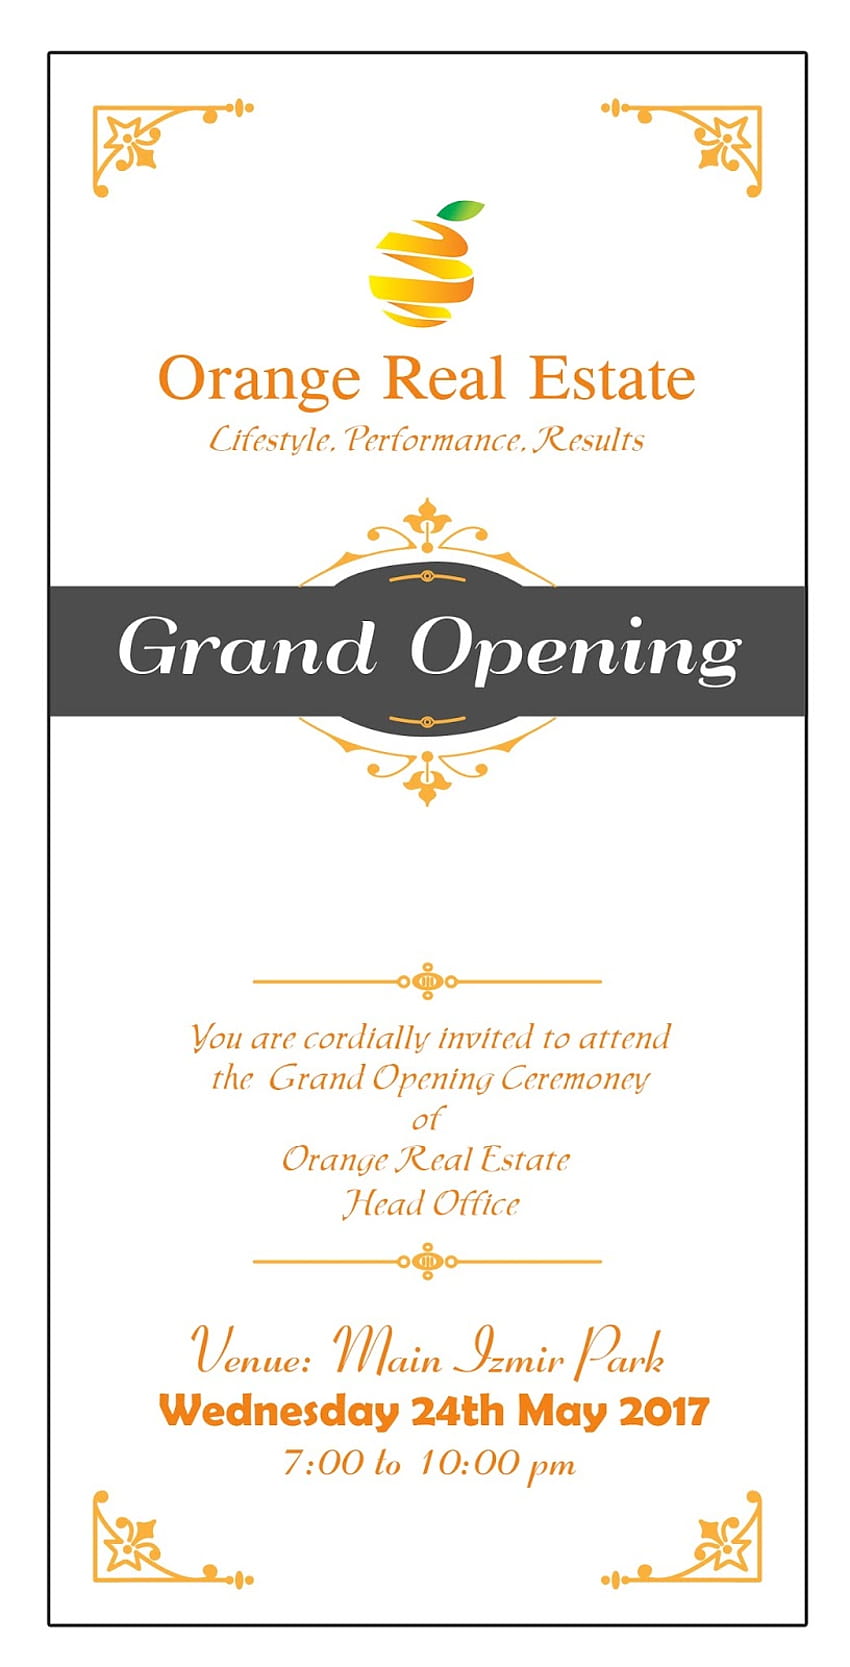 Grand Opening Ceremony Invitation Card Orange Real Estate by Asad Abbas HD phone wallpaper